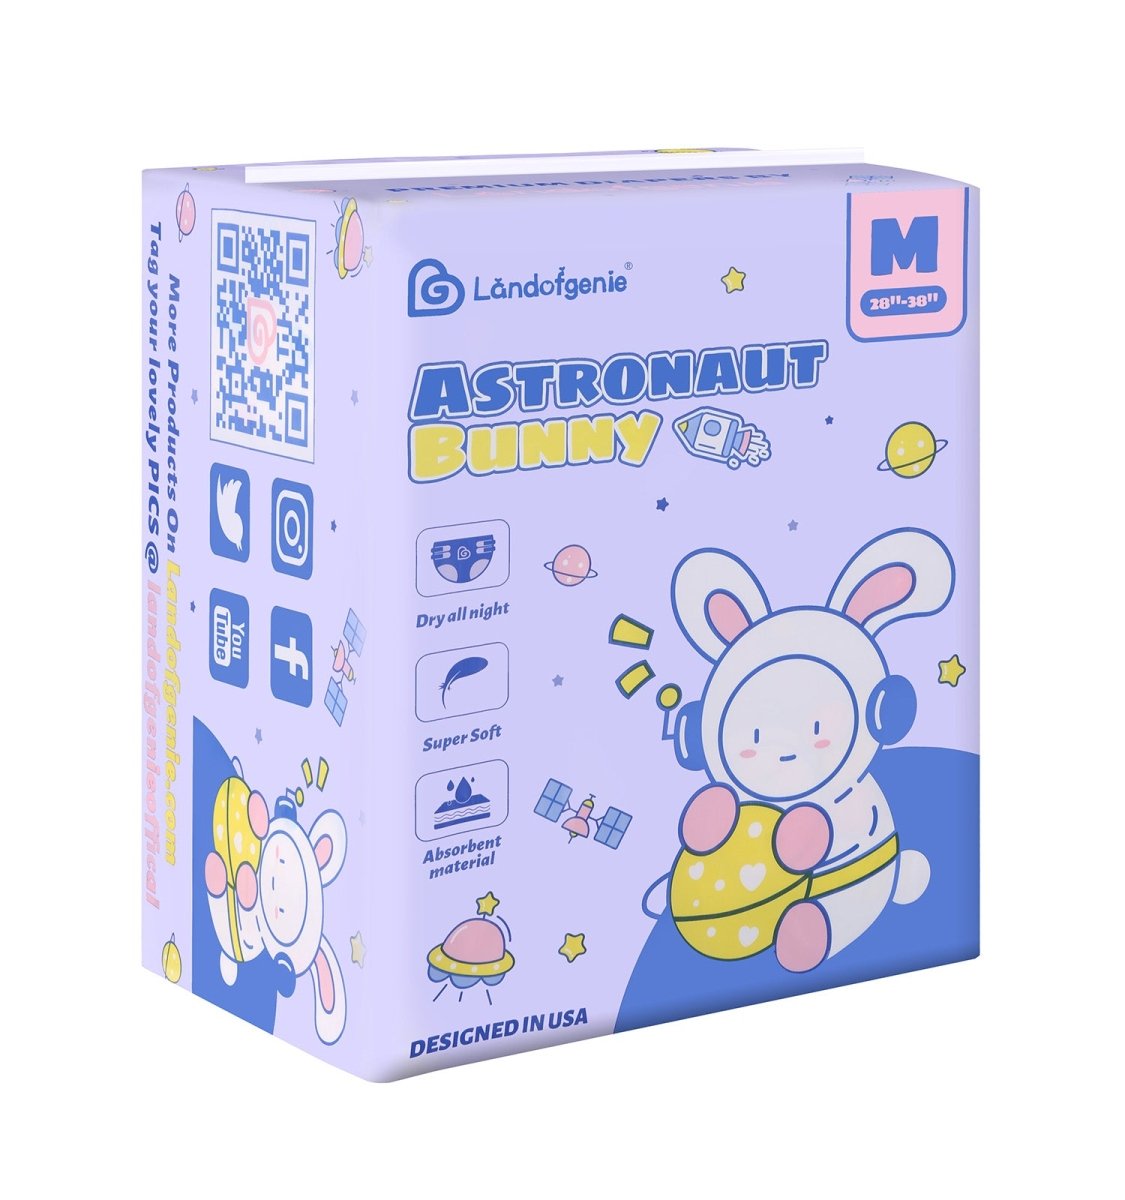 Landofgenie Adult ABDL Diapers Overnight Adult Diapers With 10 Pieces - Astronaut Bunny - landofgenie